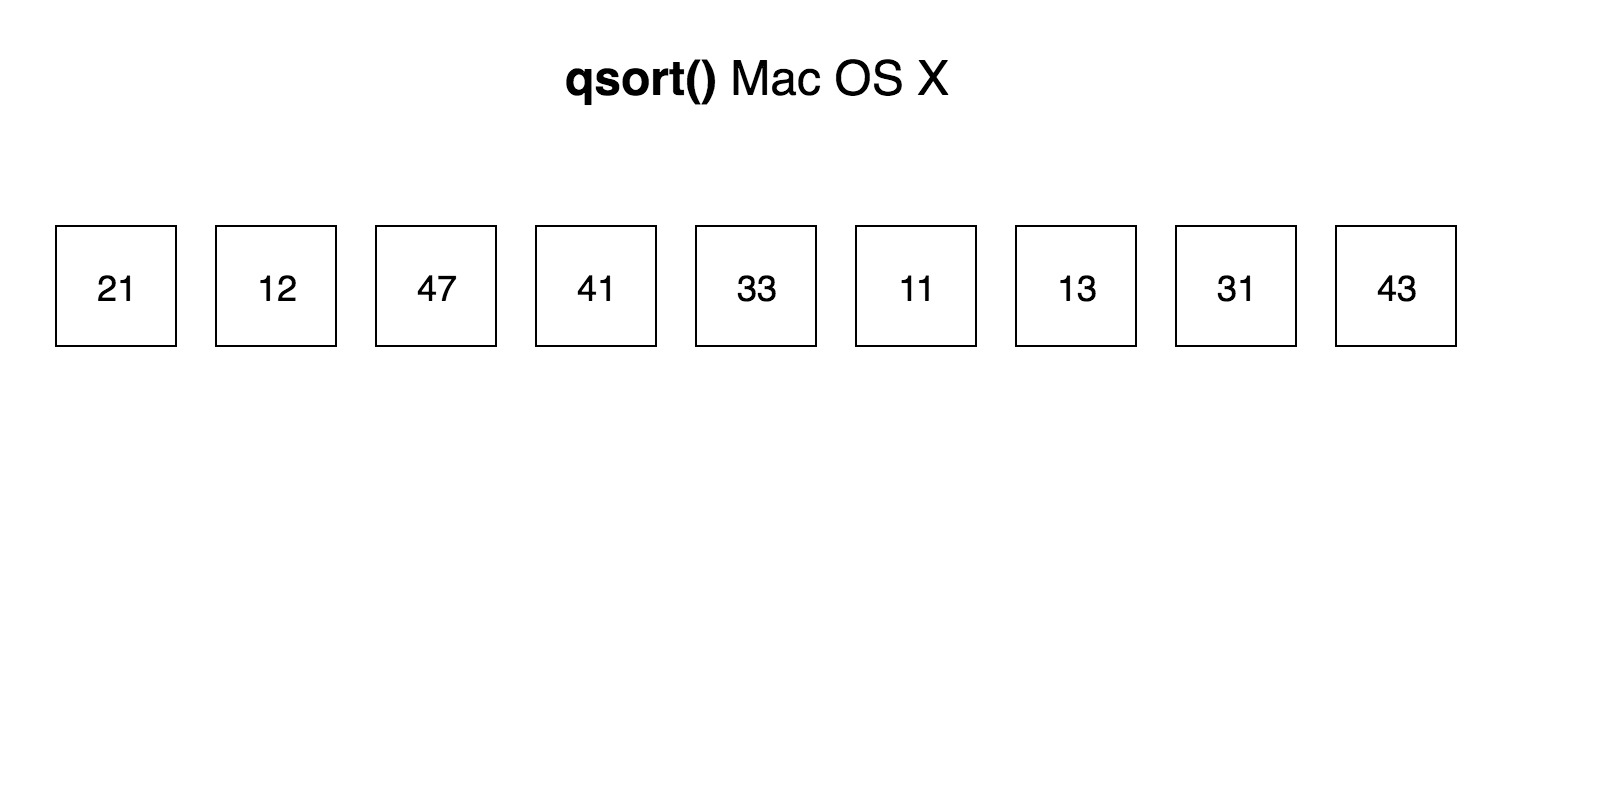 Animation showing the Mac OS X implementation of qsort() sorting the [21, 12, 47, 41, 33, 11, 13, 31, 43] array by the first digit, obtaining [12, 13, 11, 21, 33, 31, 47, 43, 41]